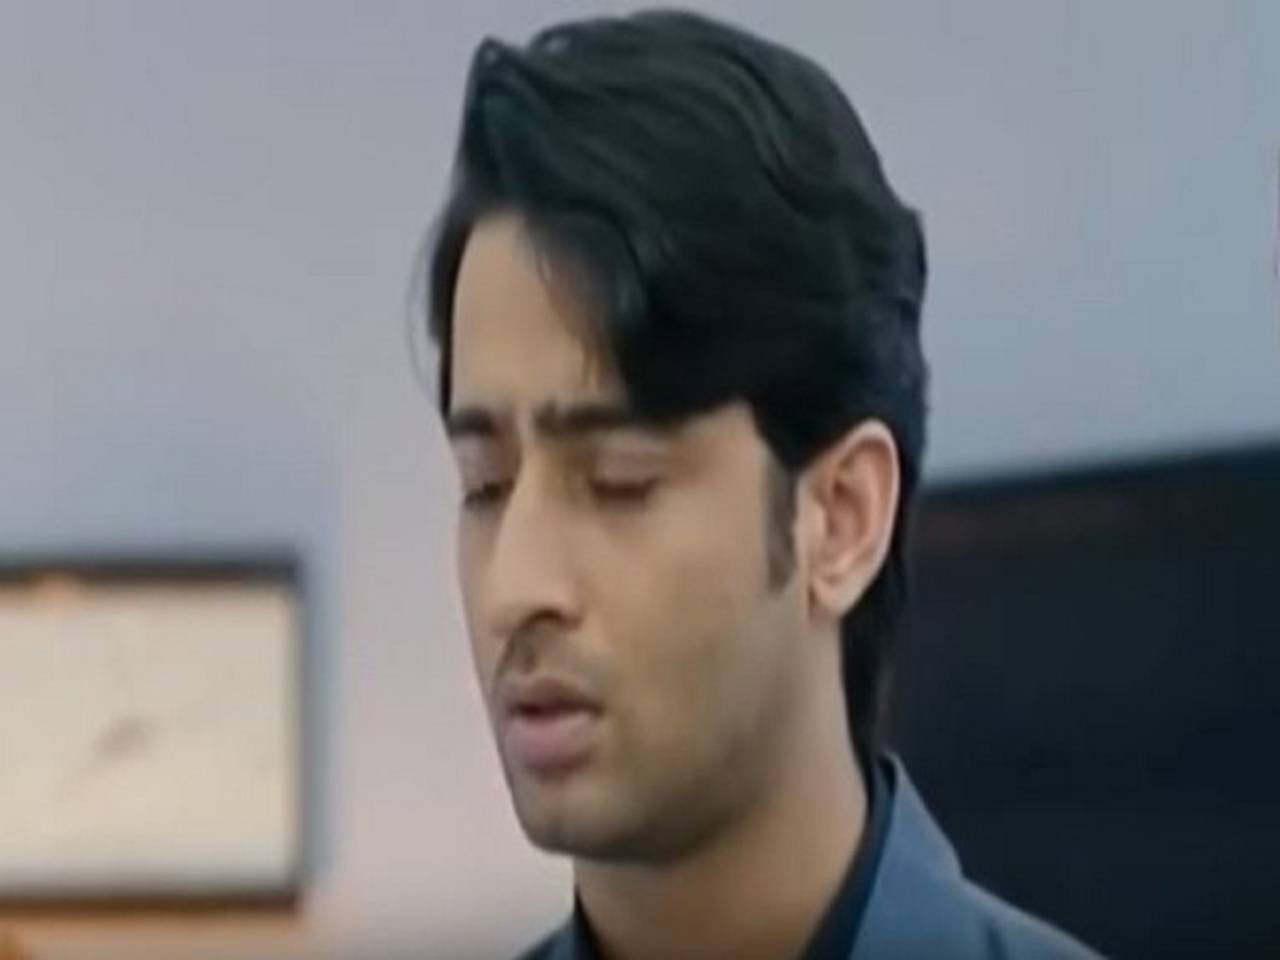 𝓝𝓪𝓫𝓲𝓵𝓪 𝓐𝓼𝓪𝓭 𝓚𝓱𝓪𝔀𝓪𝓳𝓪 on Twitter I only watch ShaheerS  shows but no matter what when I watch ShaheerSheikh In KRPKAB as Dev Dixit  I cant think of him as anything else MamtaYPatnaik